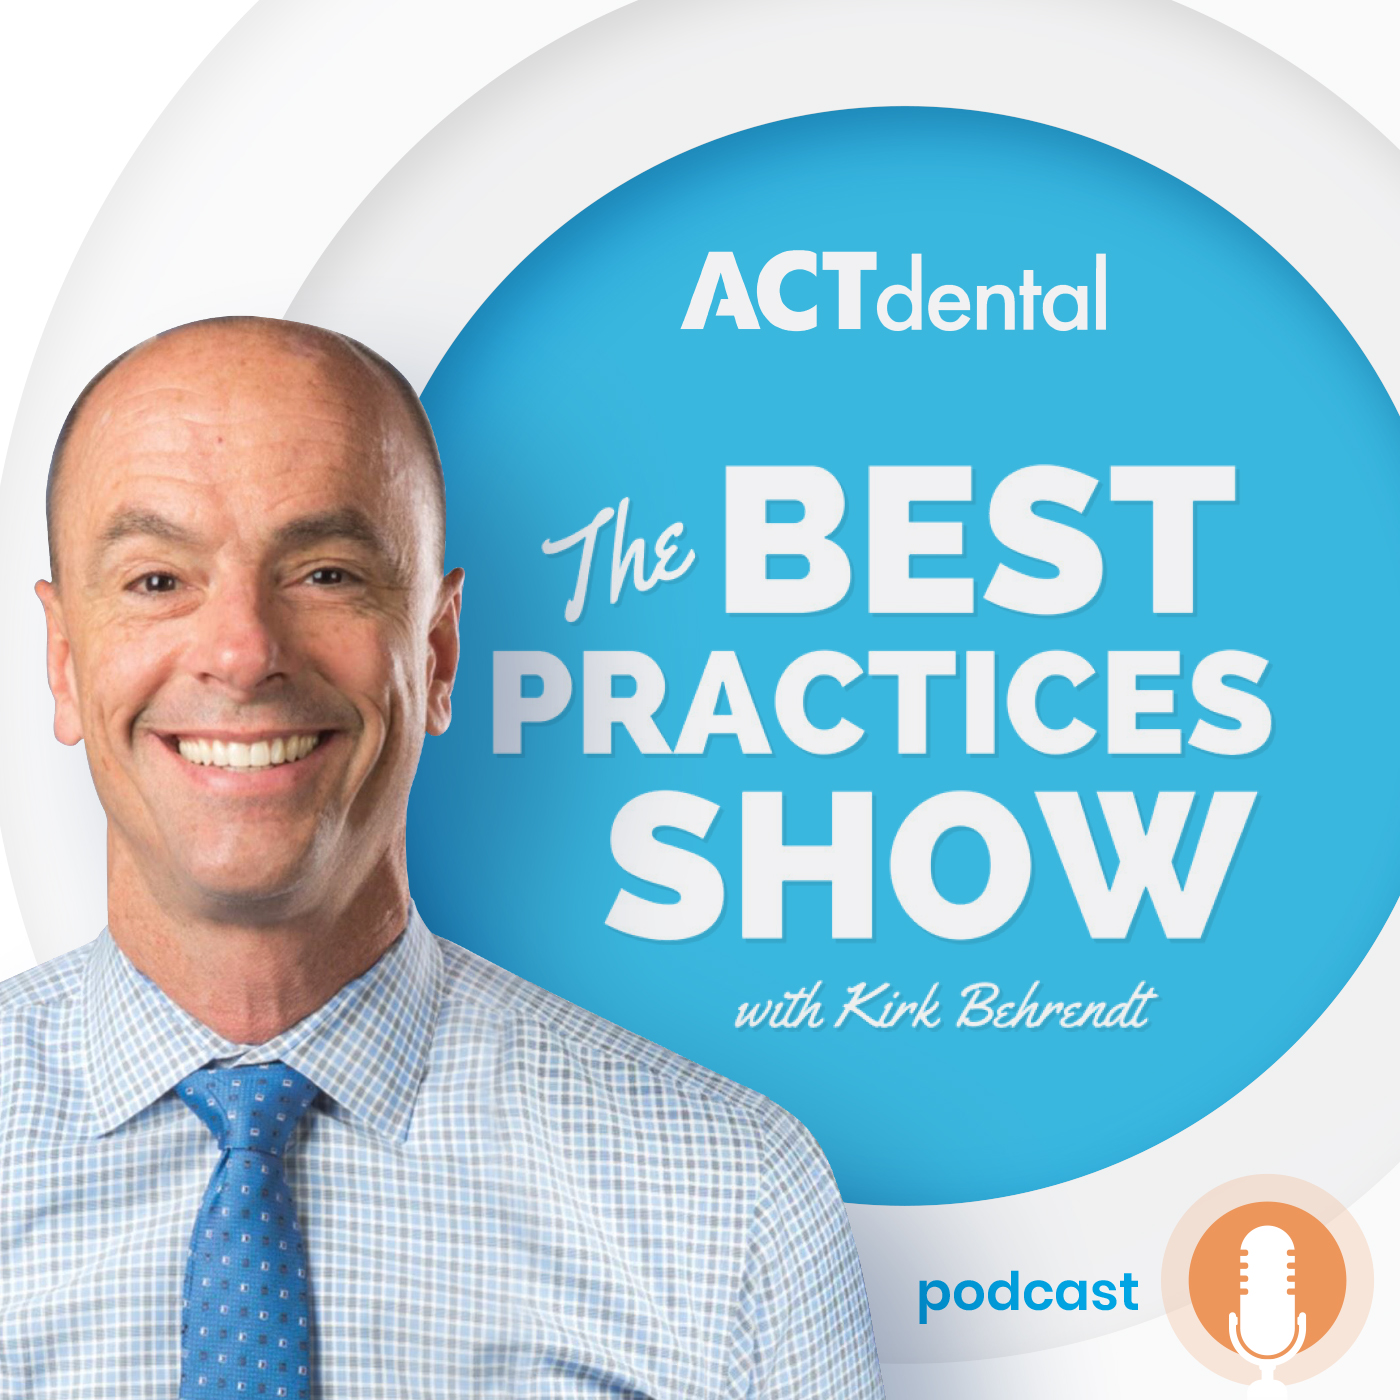 Artwork for podcast The Best Practices Show